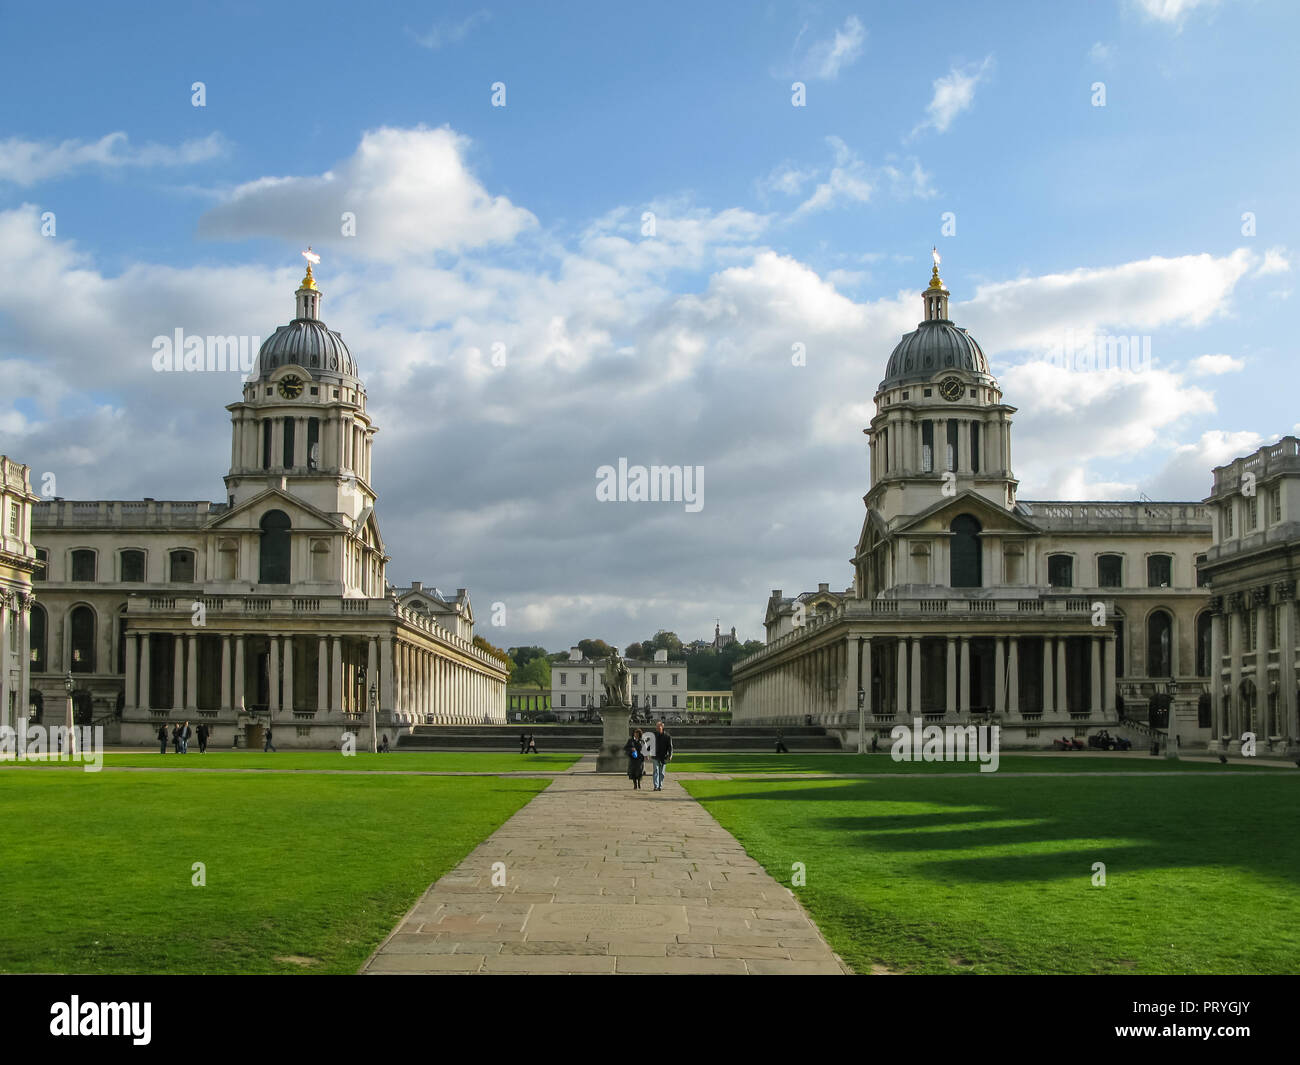 The Old Naval College, Greenwich, London, England. Designed by Sir Christopher Wren, part of Maritime Greenwich and a World Heritage Site. Stock Photo